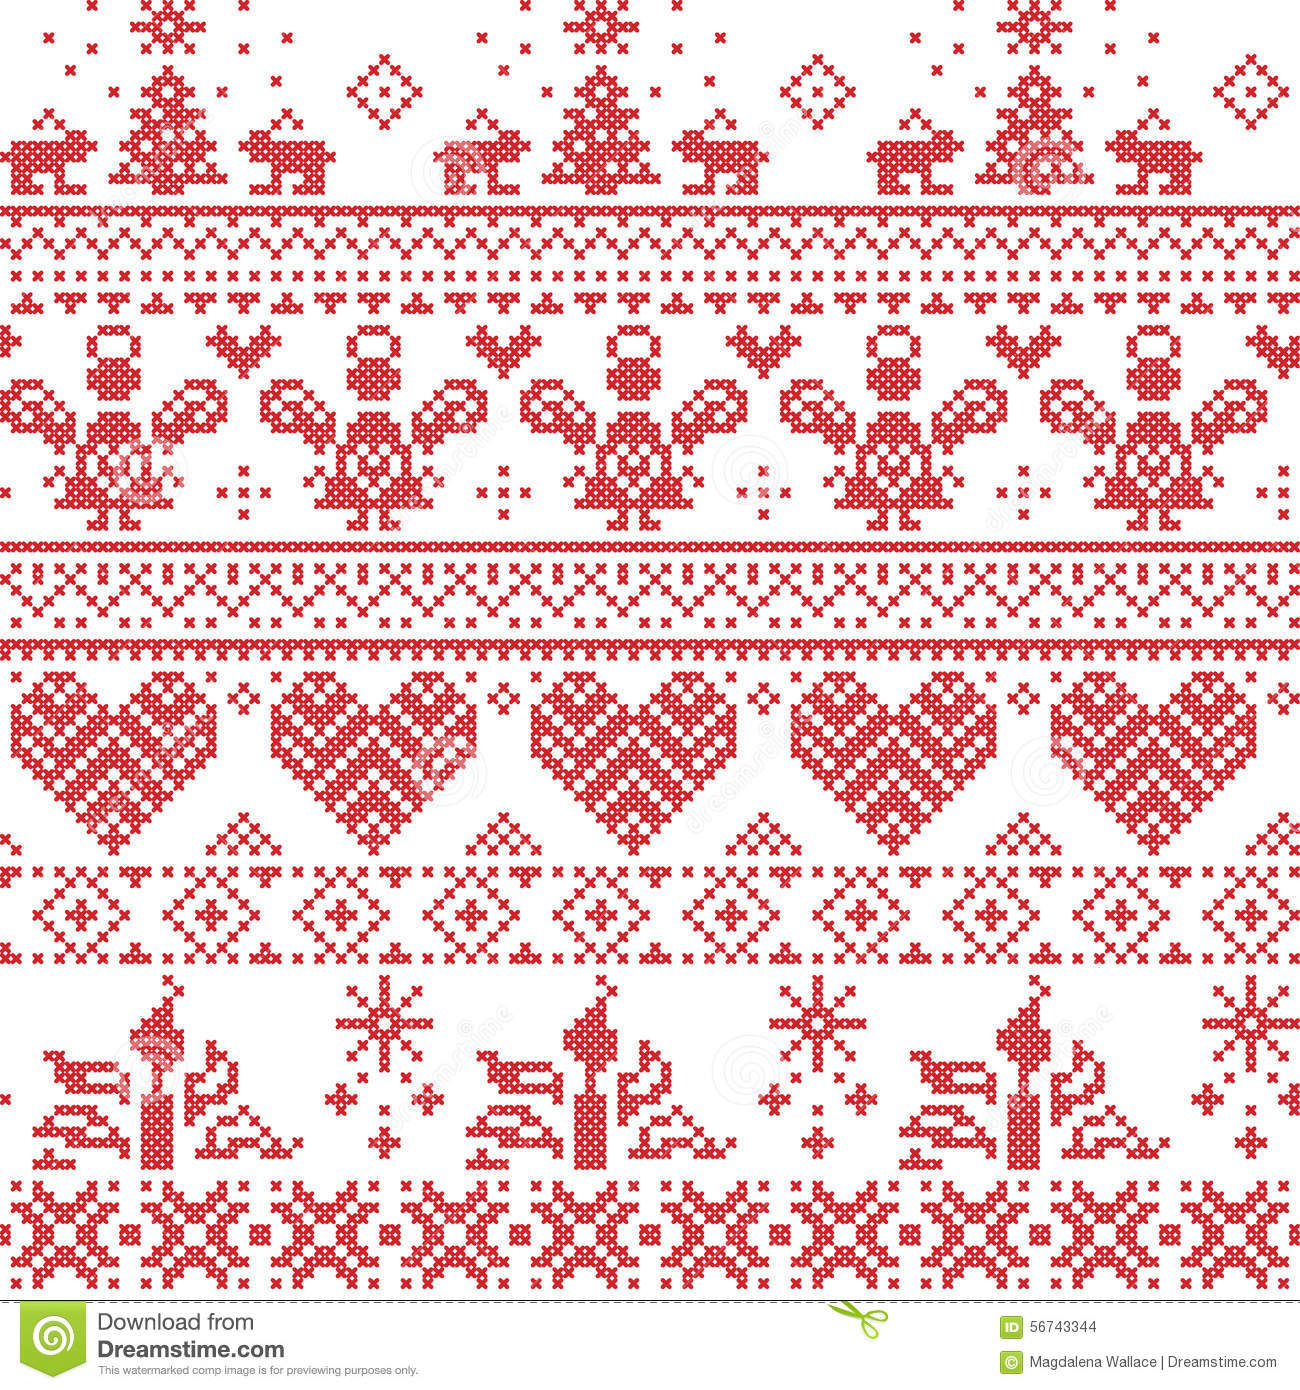 scandinavian-nordic-christmas-seamless-cross-stitch-pattern-angels-xmas-trees-rabbits-snowflakes-candles-white-red-56743344